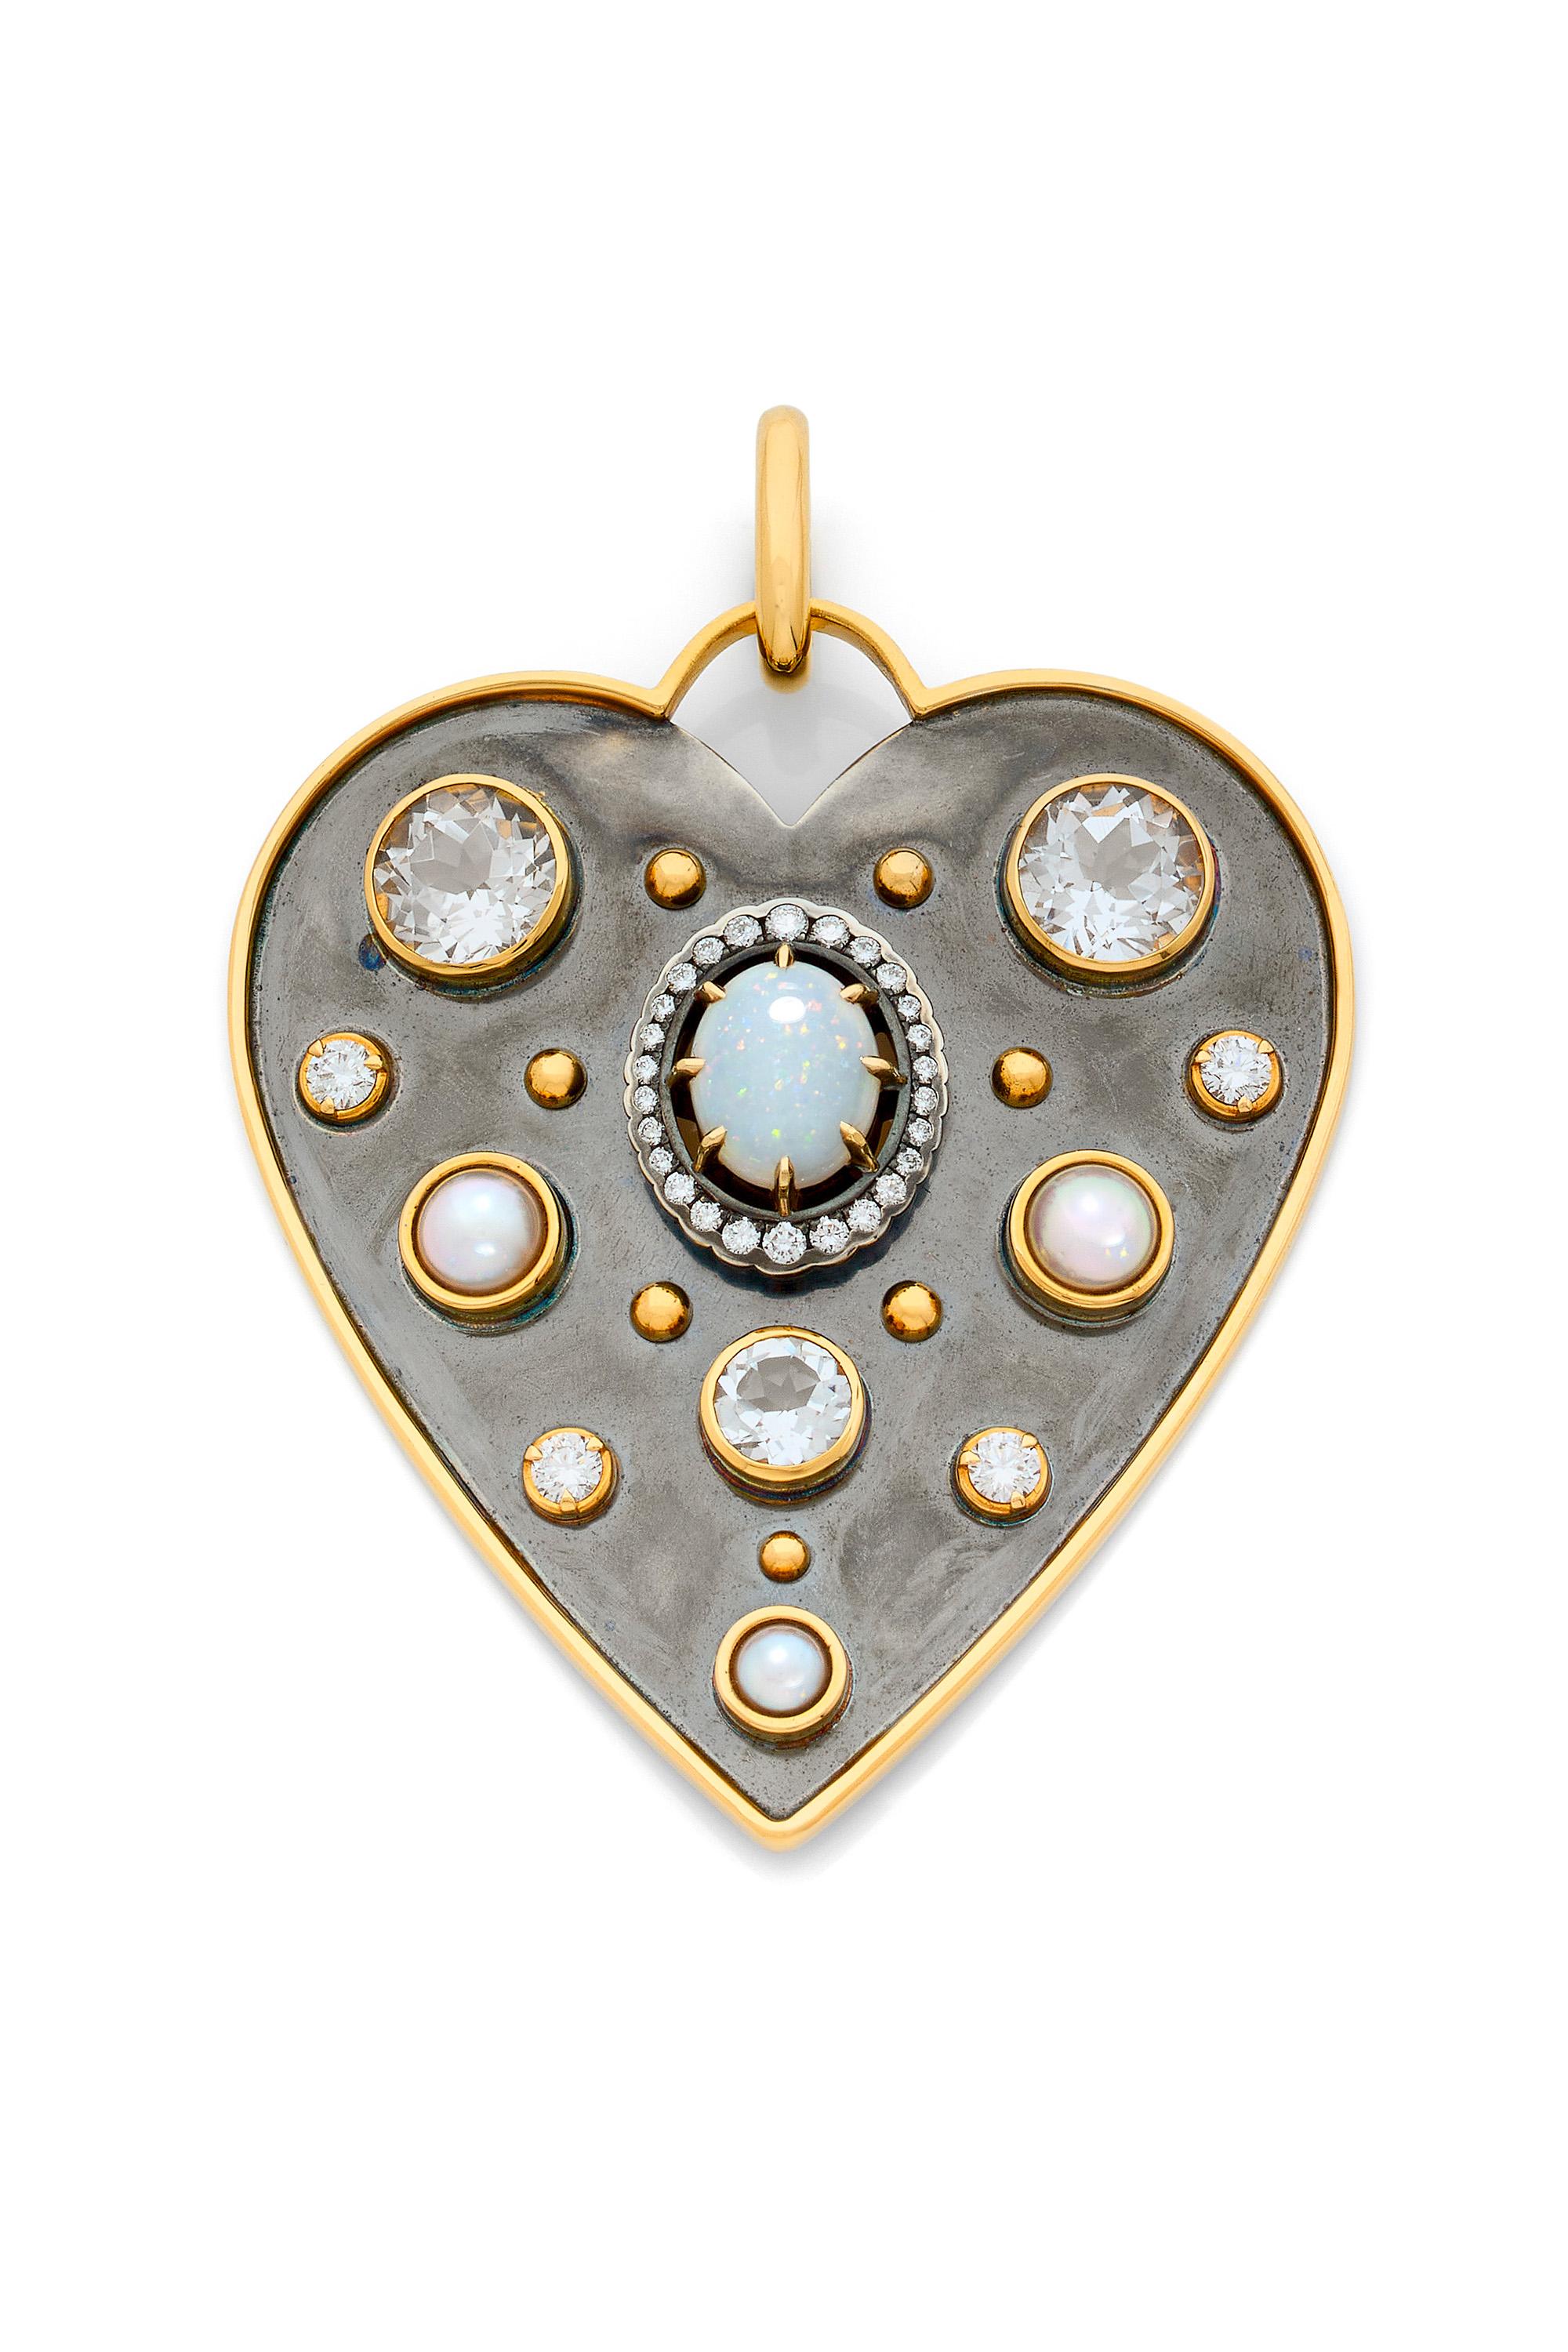 Yellow gold and distressed silver charm studded with an opal surrounded by diamonds, white sapphires and akoya pearls. Openable gold bail.

Sold without the chain. 

Available with chain on request.

Details:
Opal, White Sapphire and Akoya Pearls
32